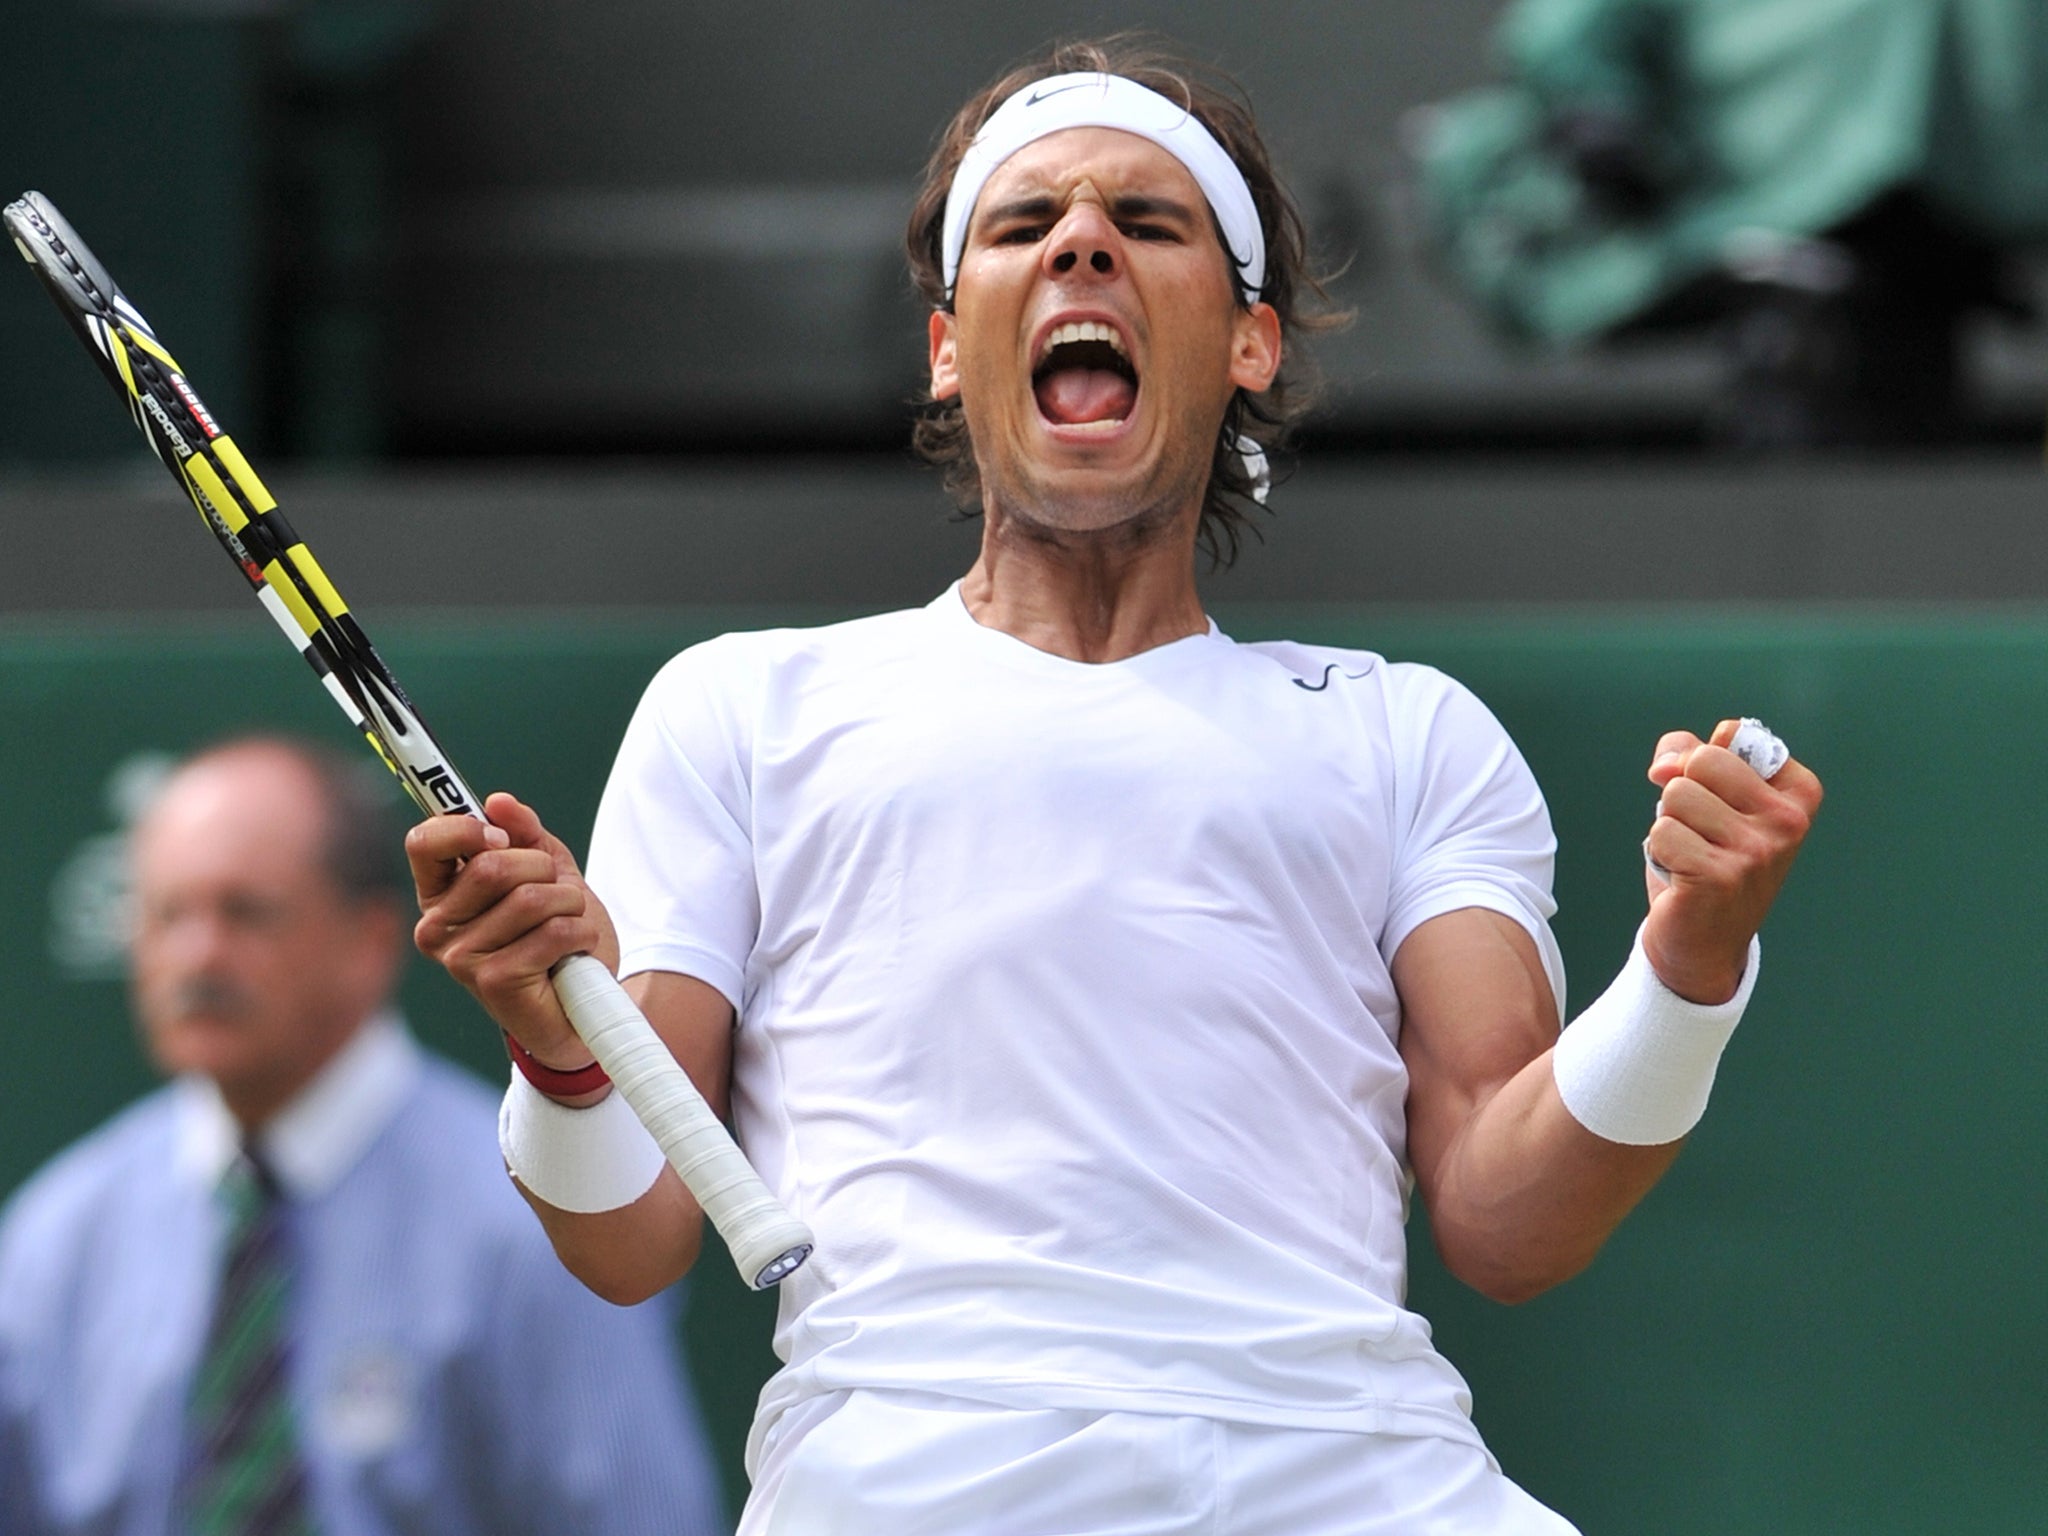 Rafael Nadal shows his relief after coming from behind to beat Lukas Rosol